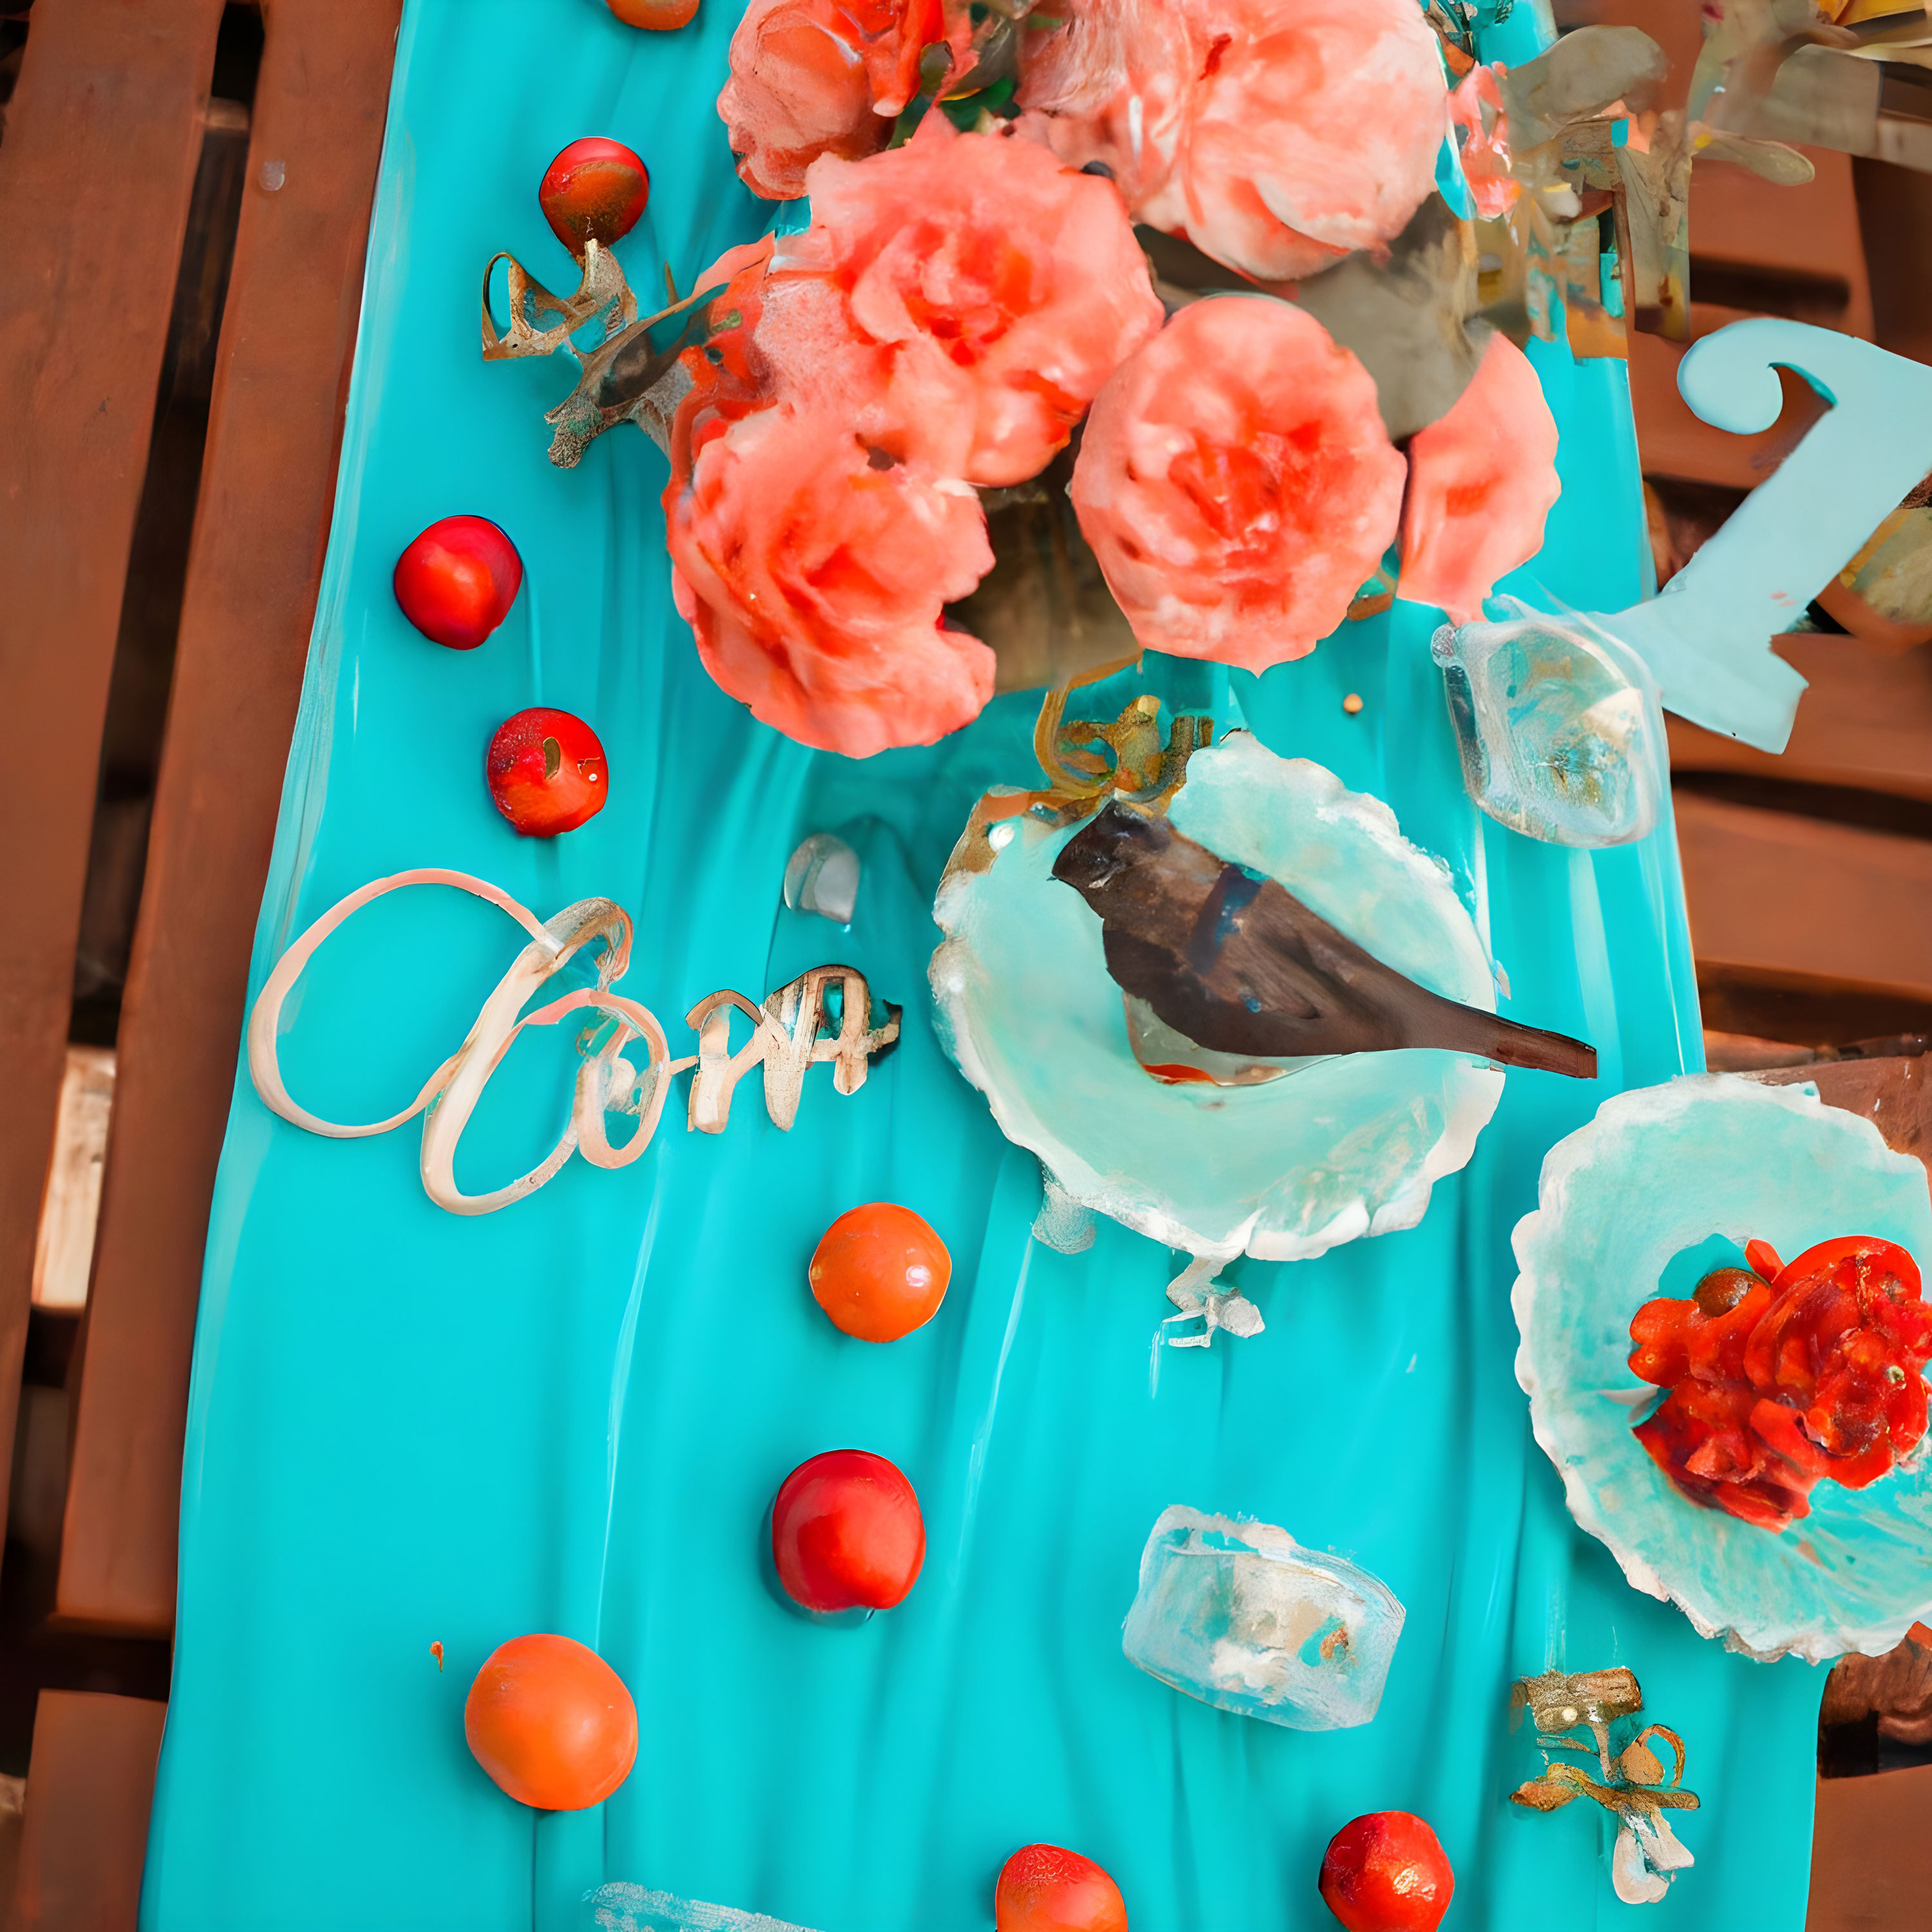 Turquoise-and-Coral-Wedding-Colors-Theme-Banner-from-Gentlemansguru.com_